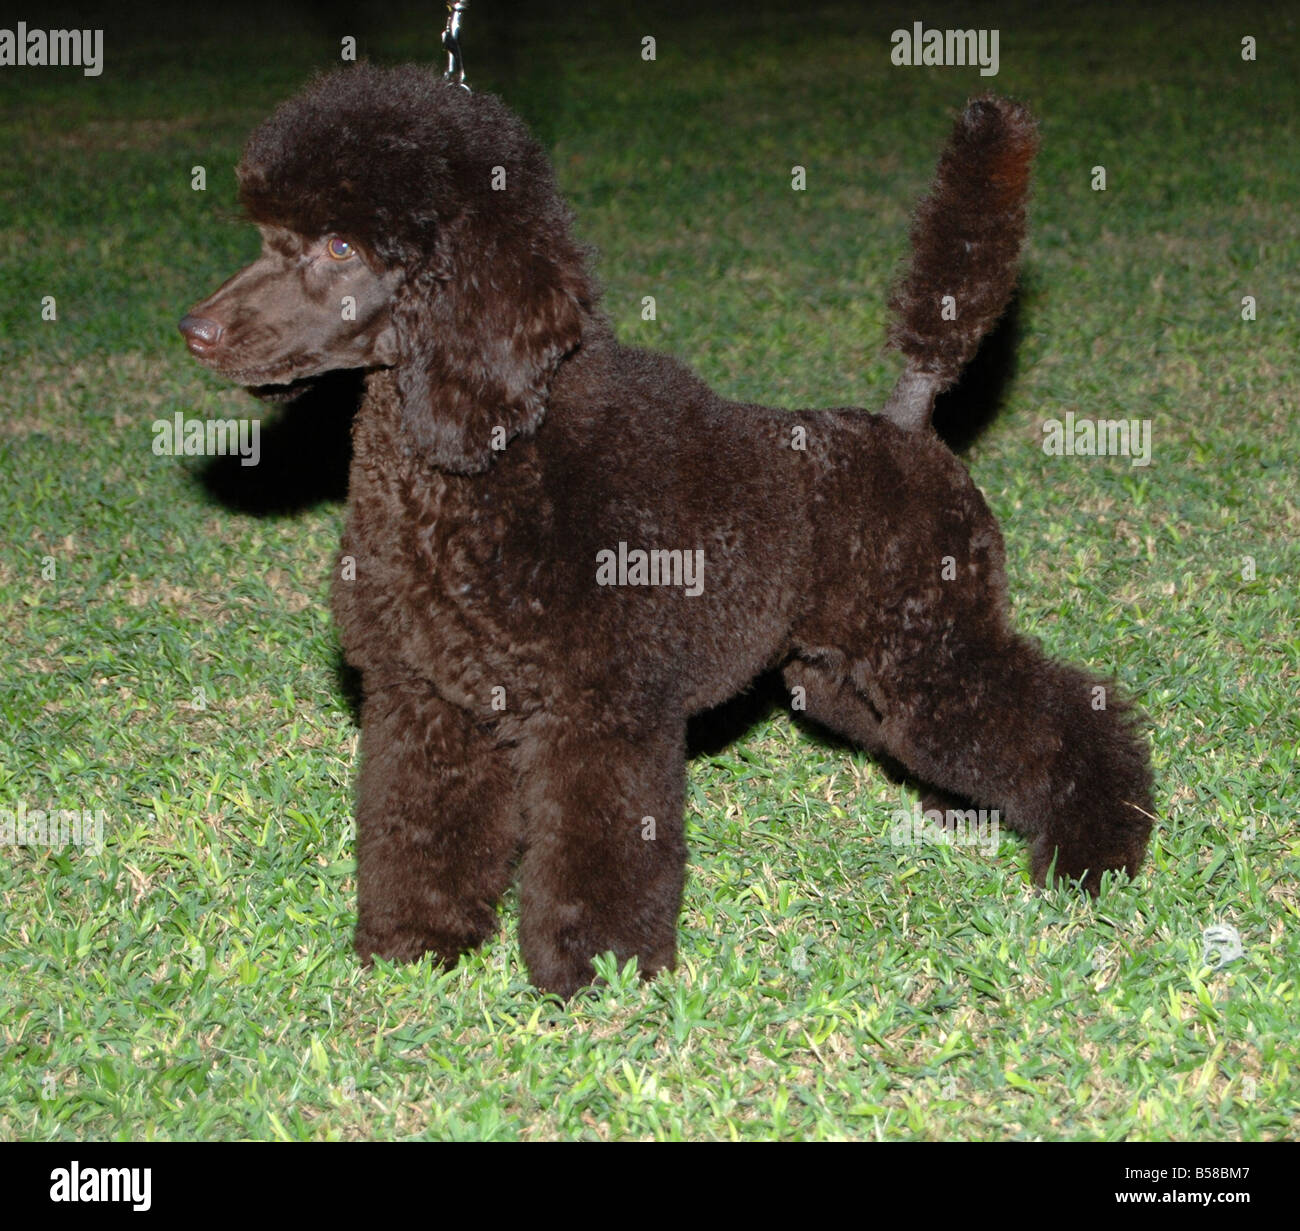 Brown Poodle High Resolution Stock Photography and Images - Alamy